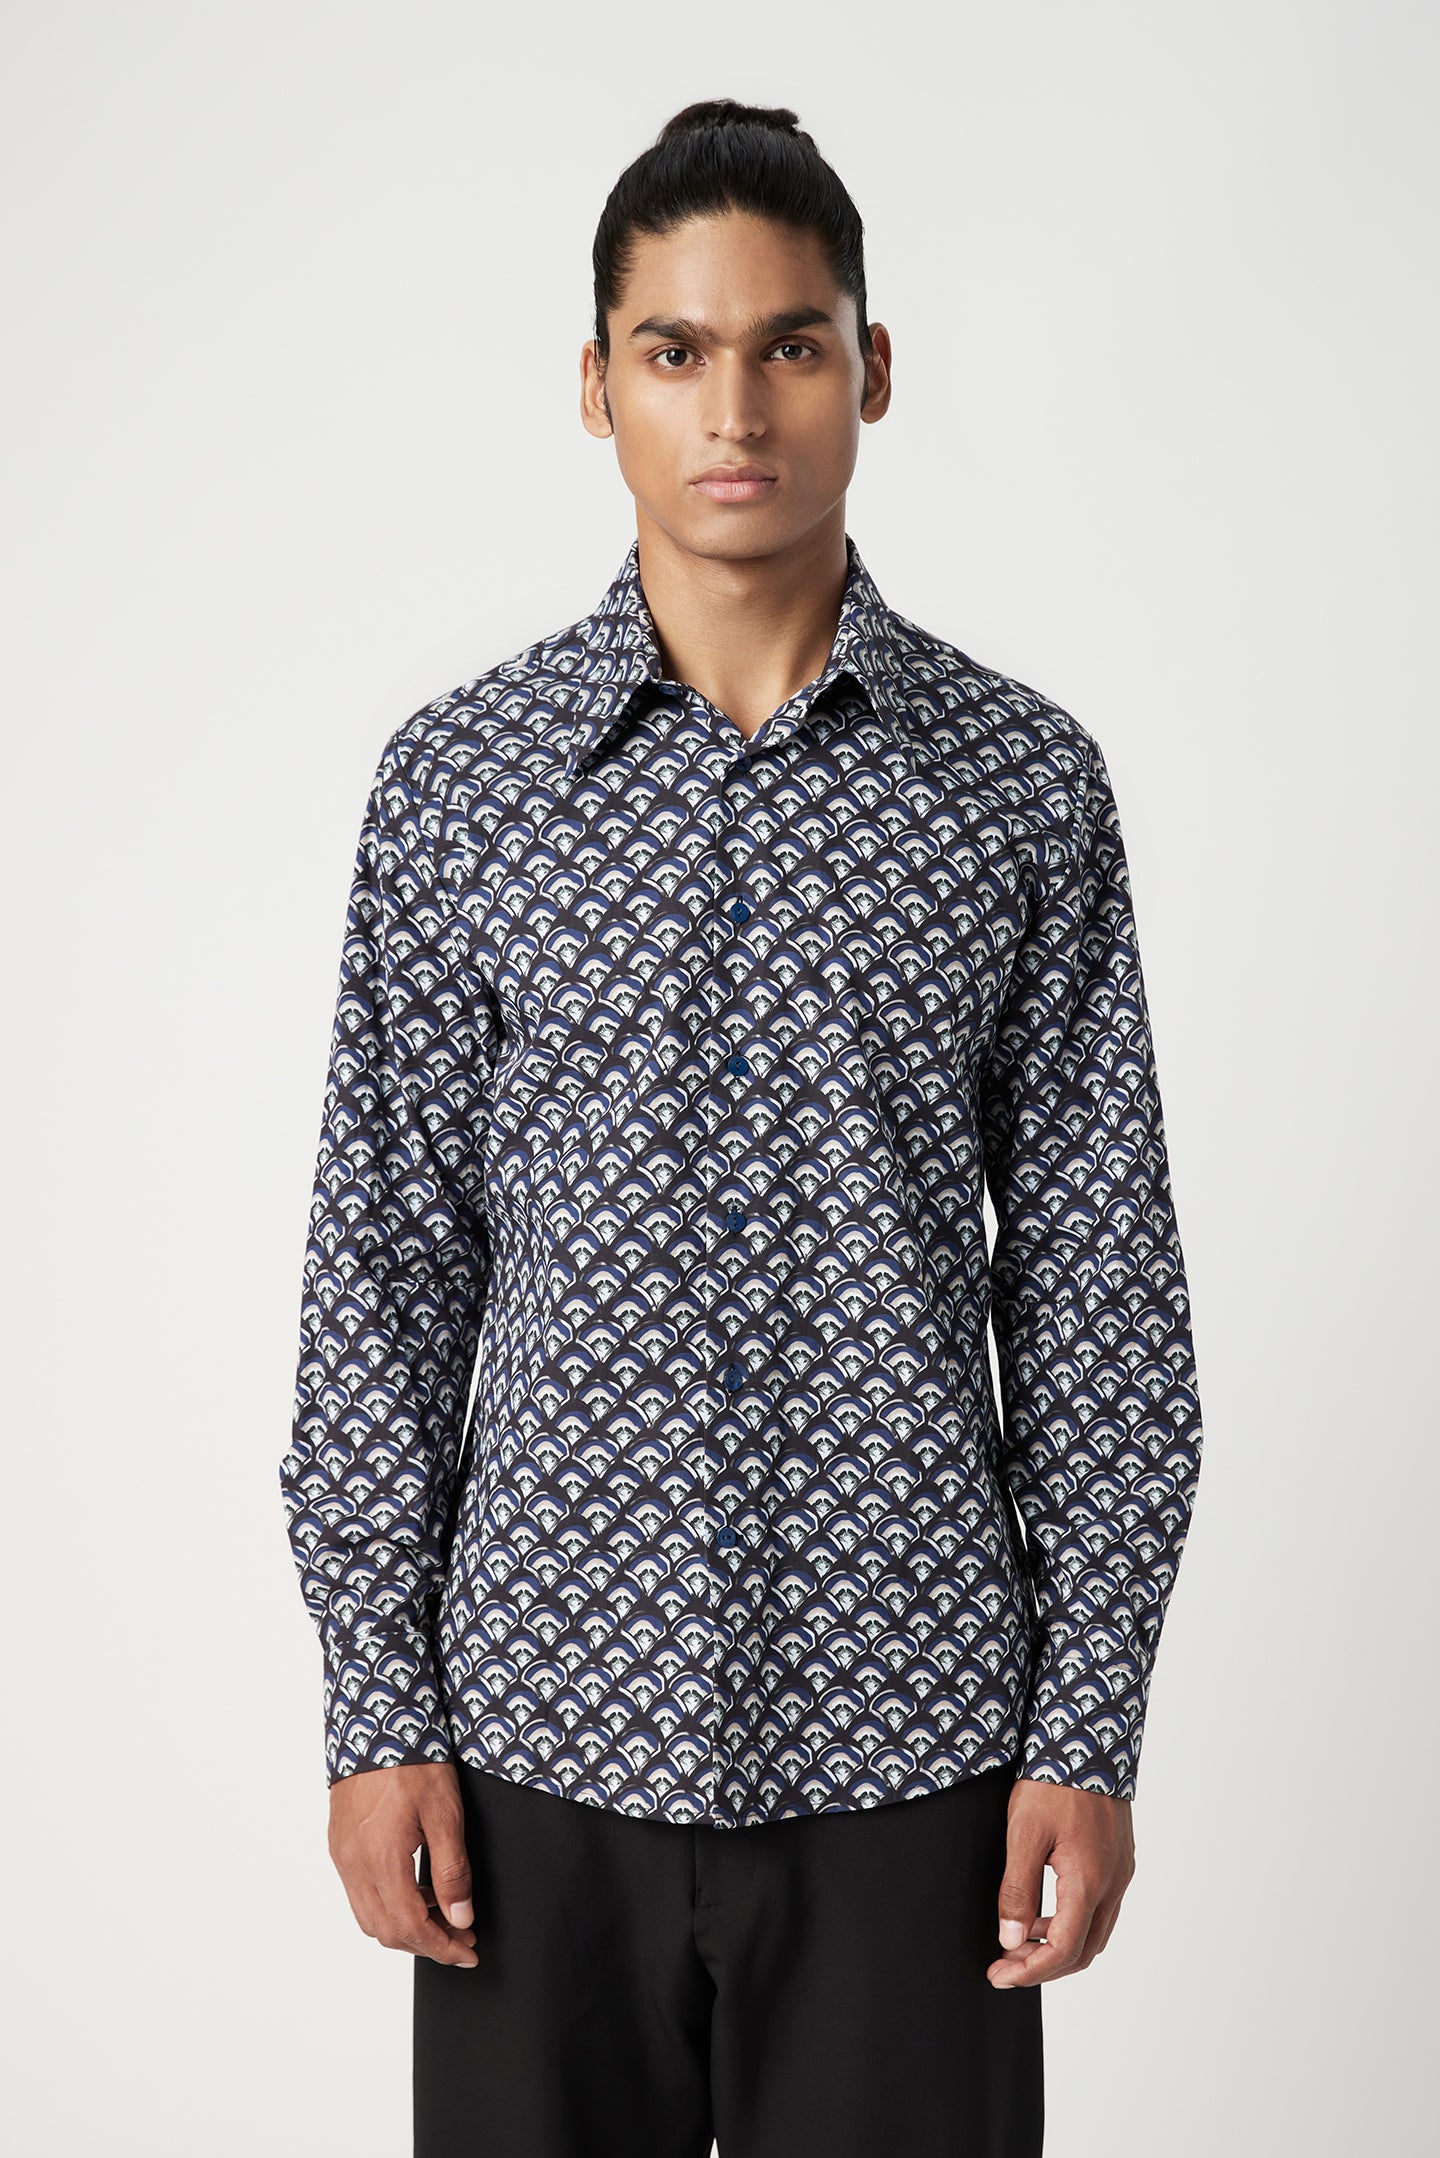 Regular Fit Button-Down Shirt in an All-Over Scallop Print